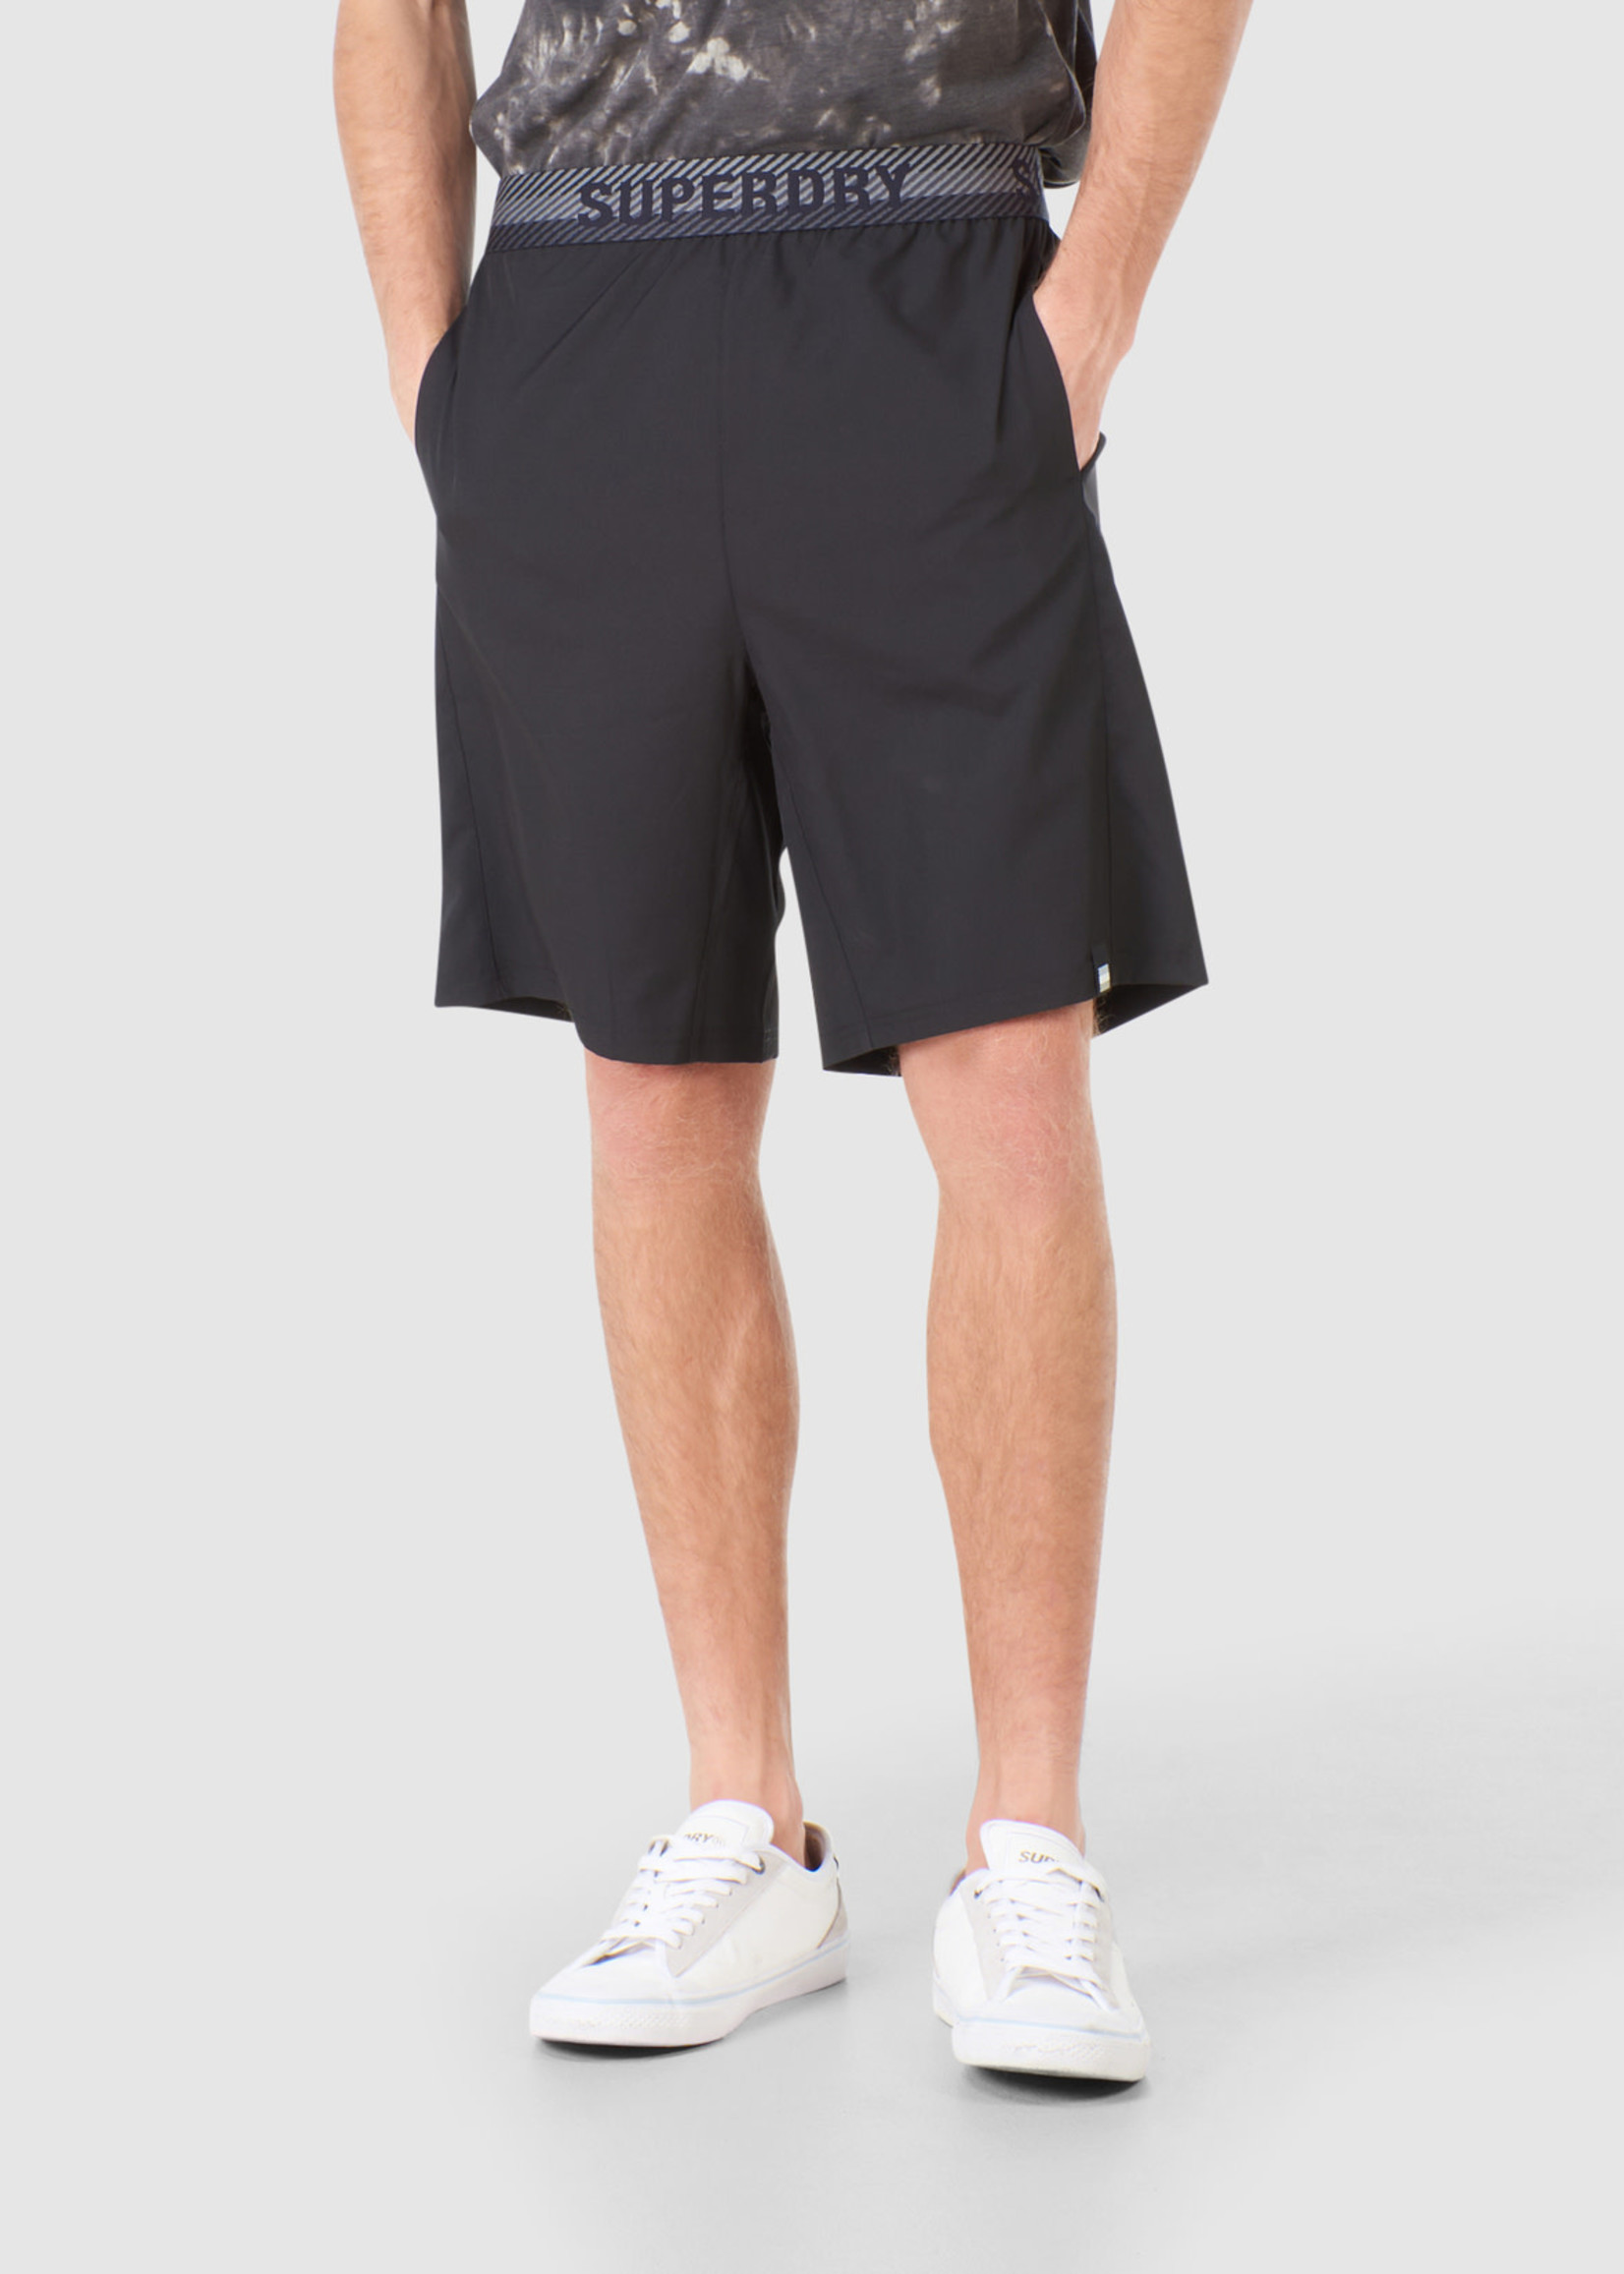 Superdry Train Relaxed Short (Black)